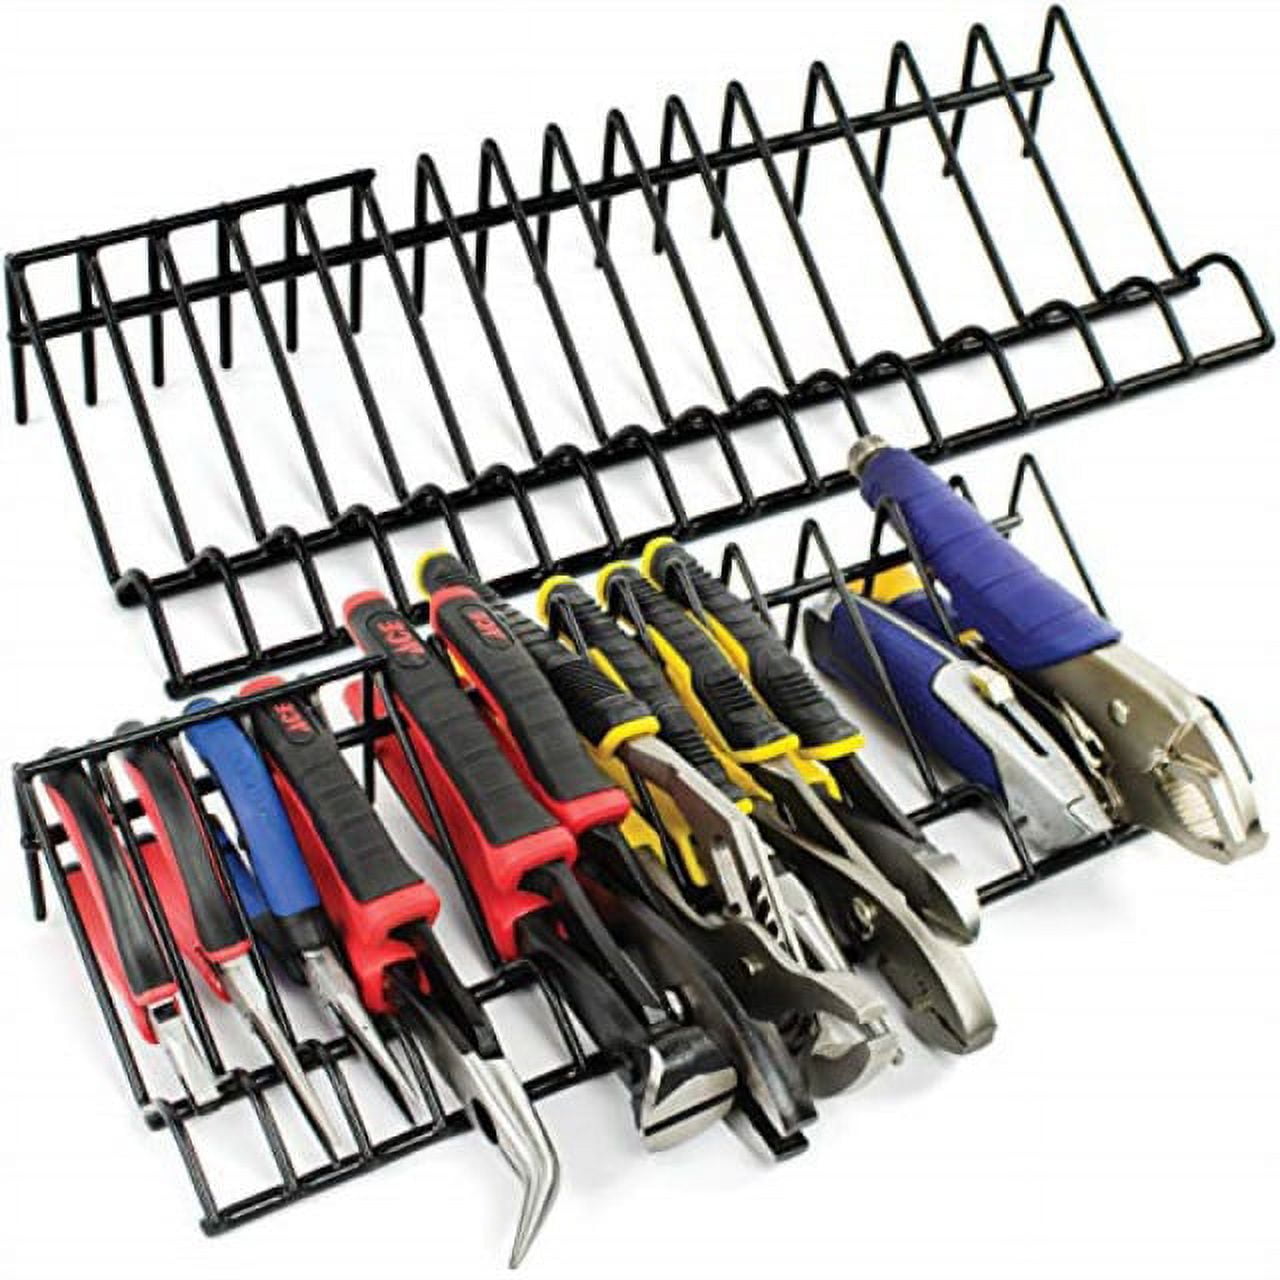 Mayouko Pliers Organizer Rack, 2 Rack, Wrench Hand Tool Holder, Tool Box  Storage and Organization Holder, Stores Spring Loaded, 15 Slots, Plier